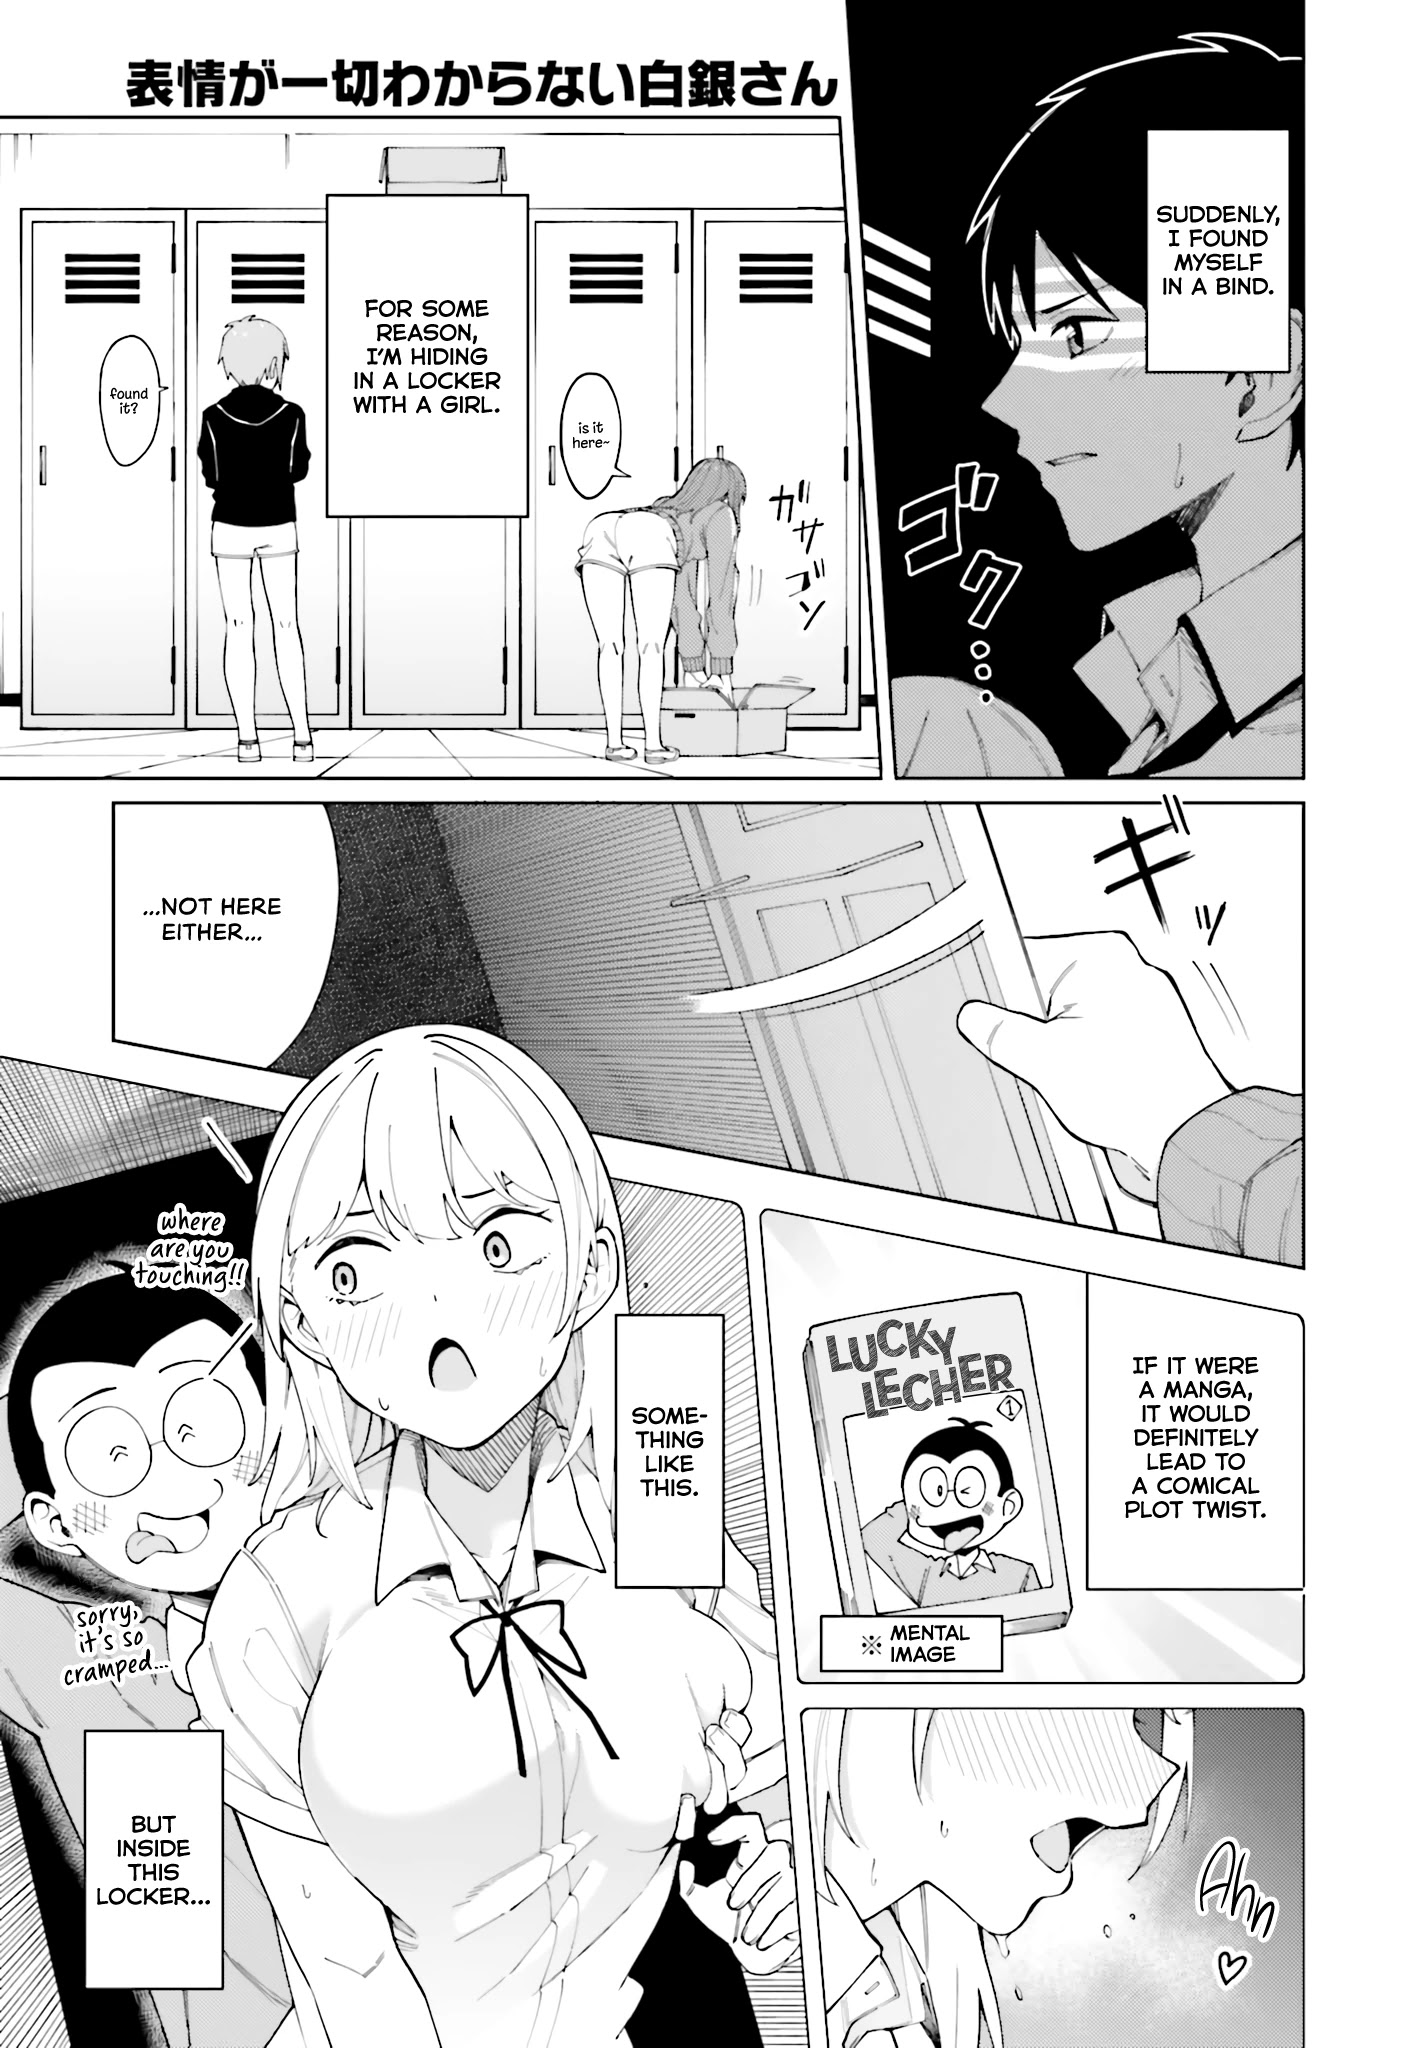 I Don't Understand Shirogane-San's Facial Expression At All - Page 1